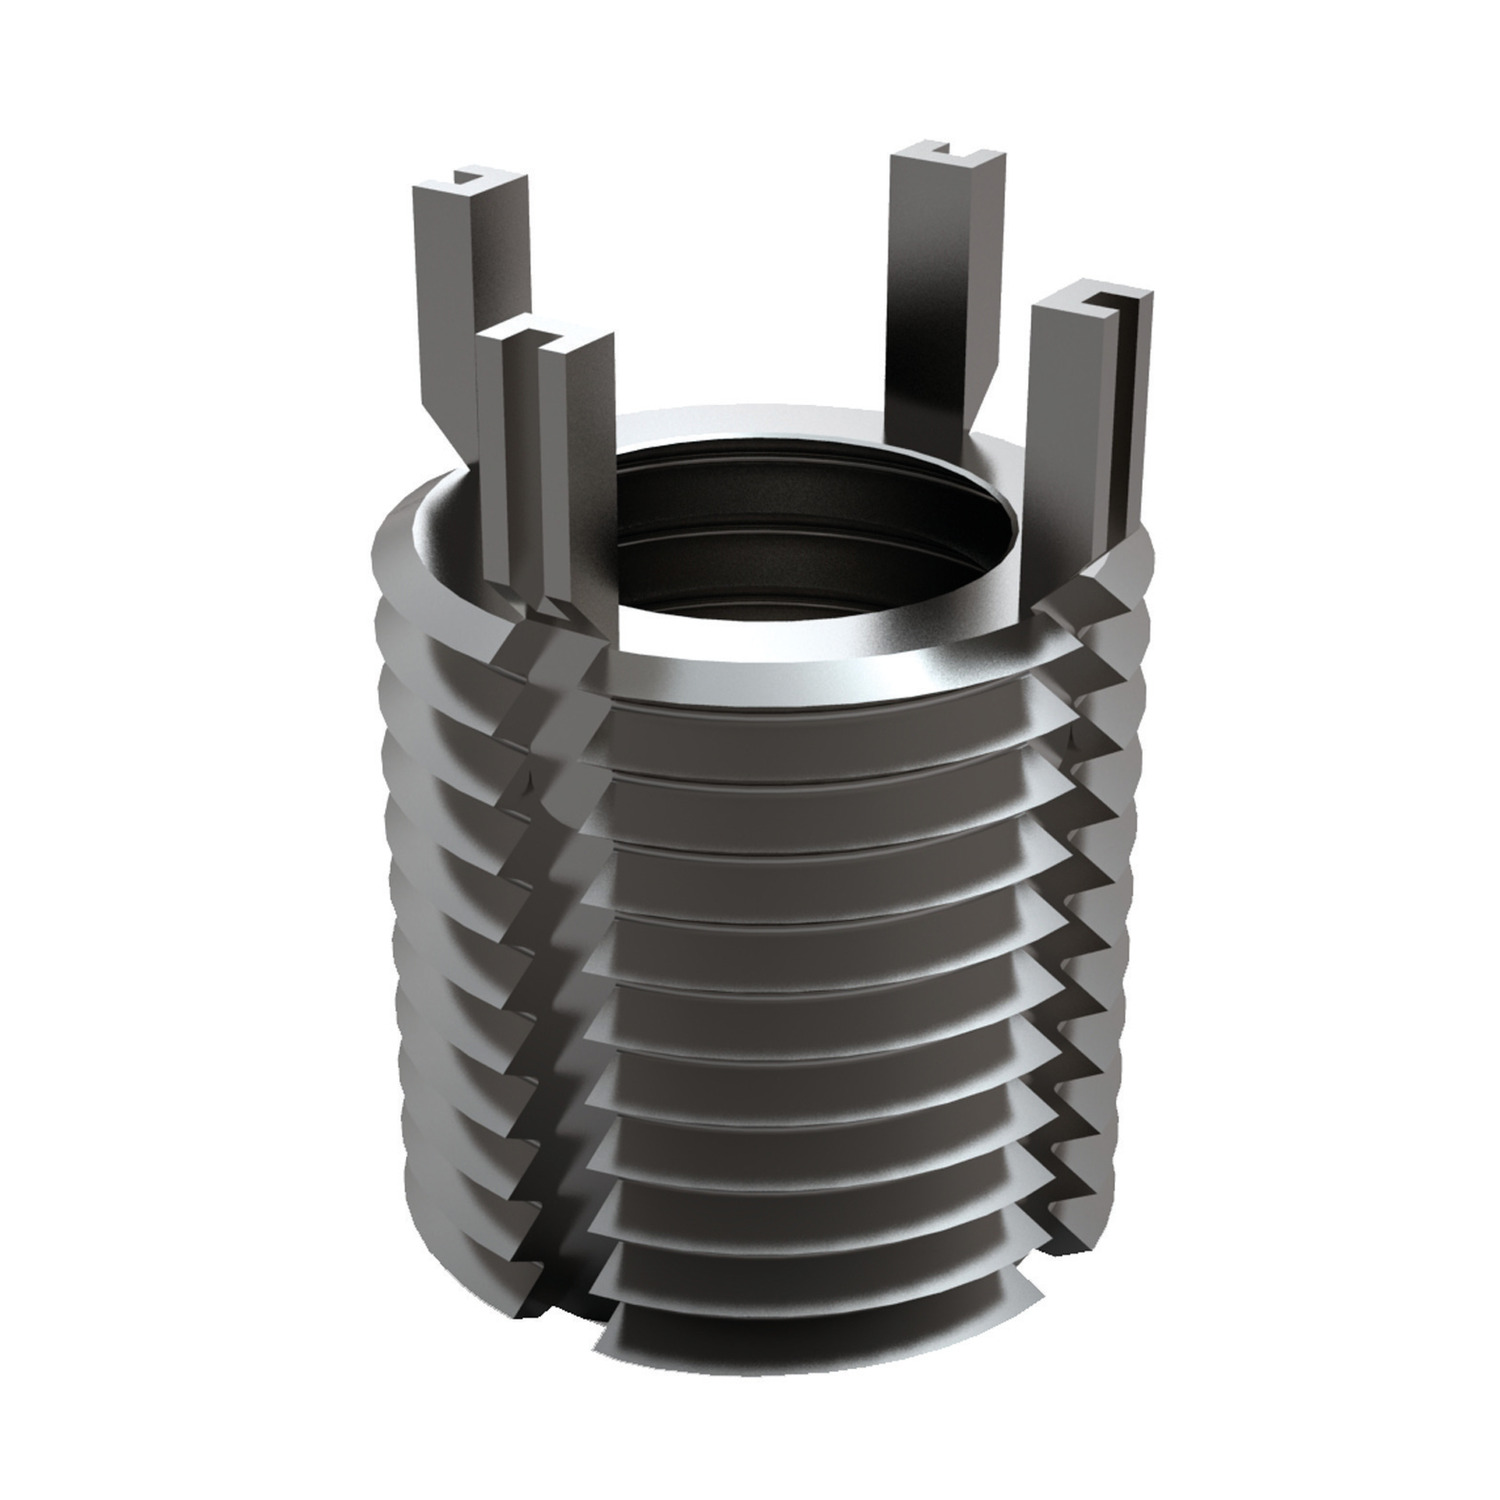 Threaded Insert - Inch Imperial, stainless threaded inserts for heavy duty applications. Wide range of sizes available.